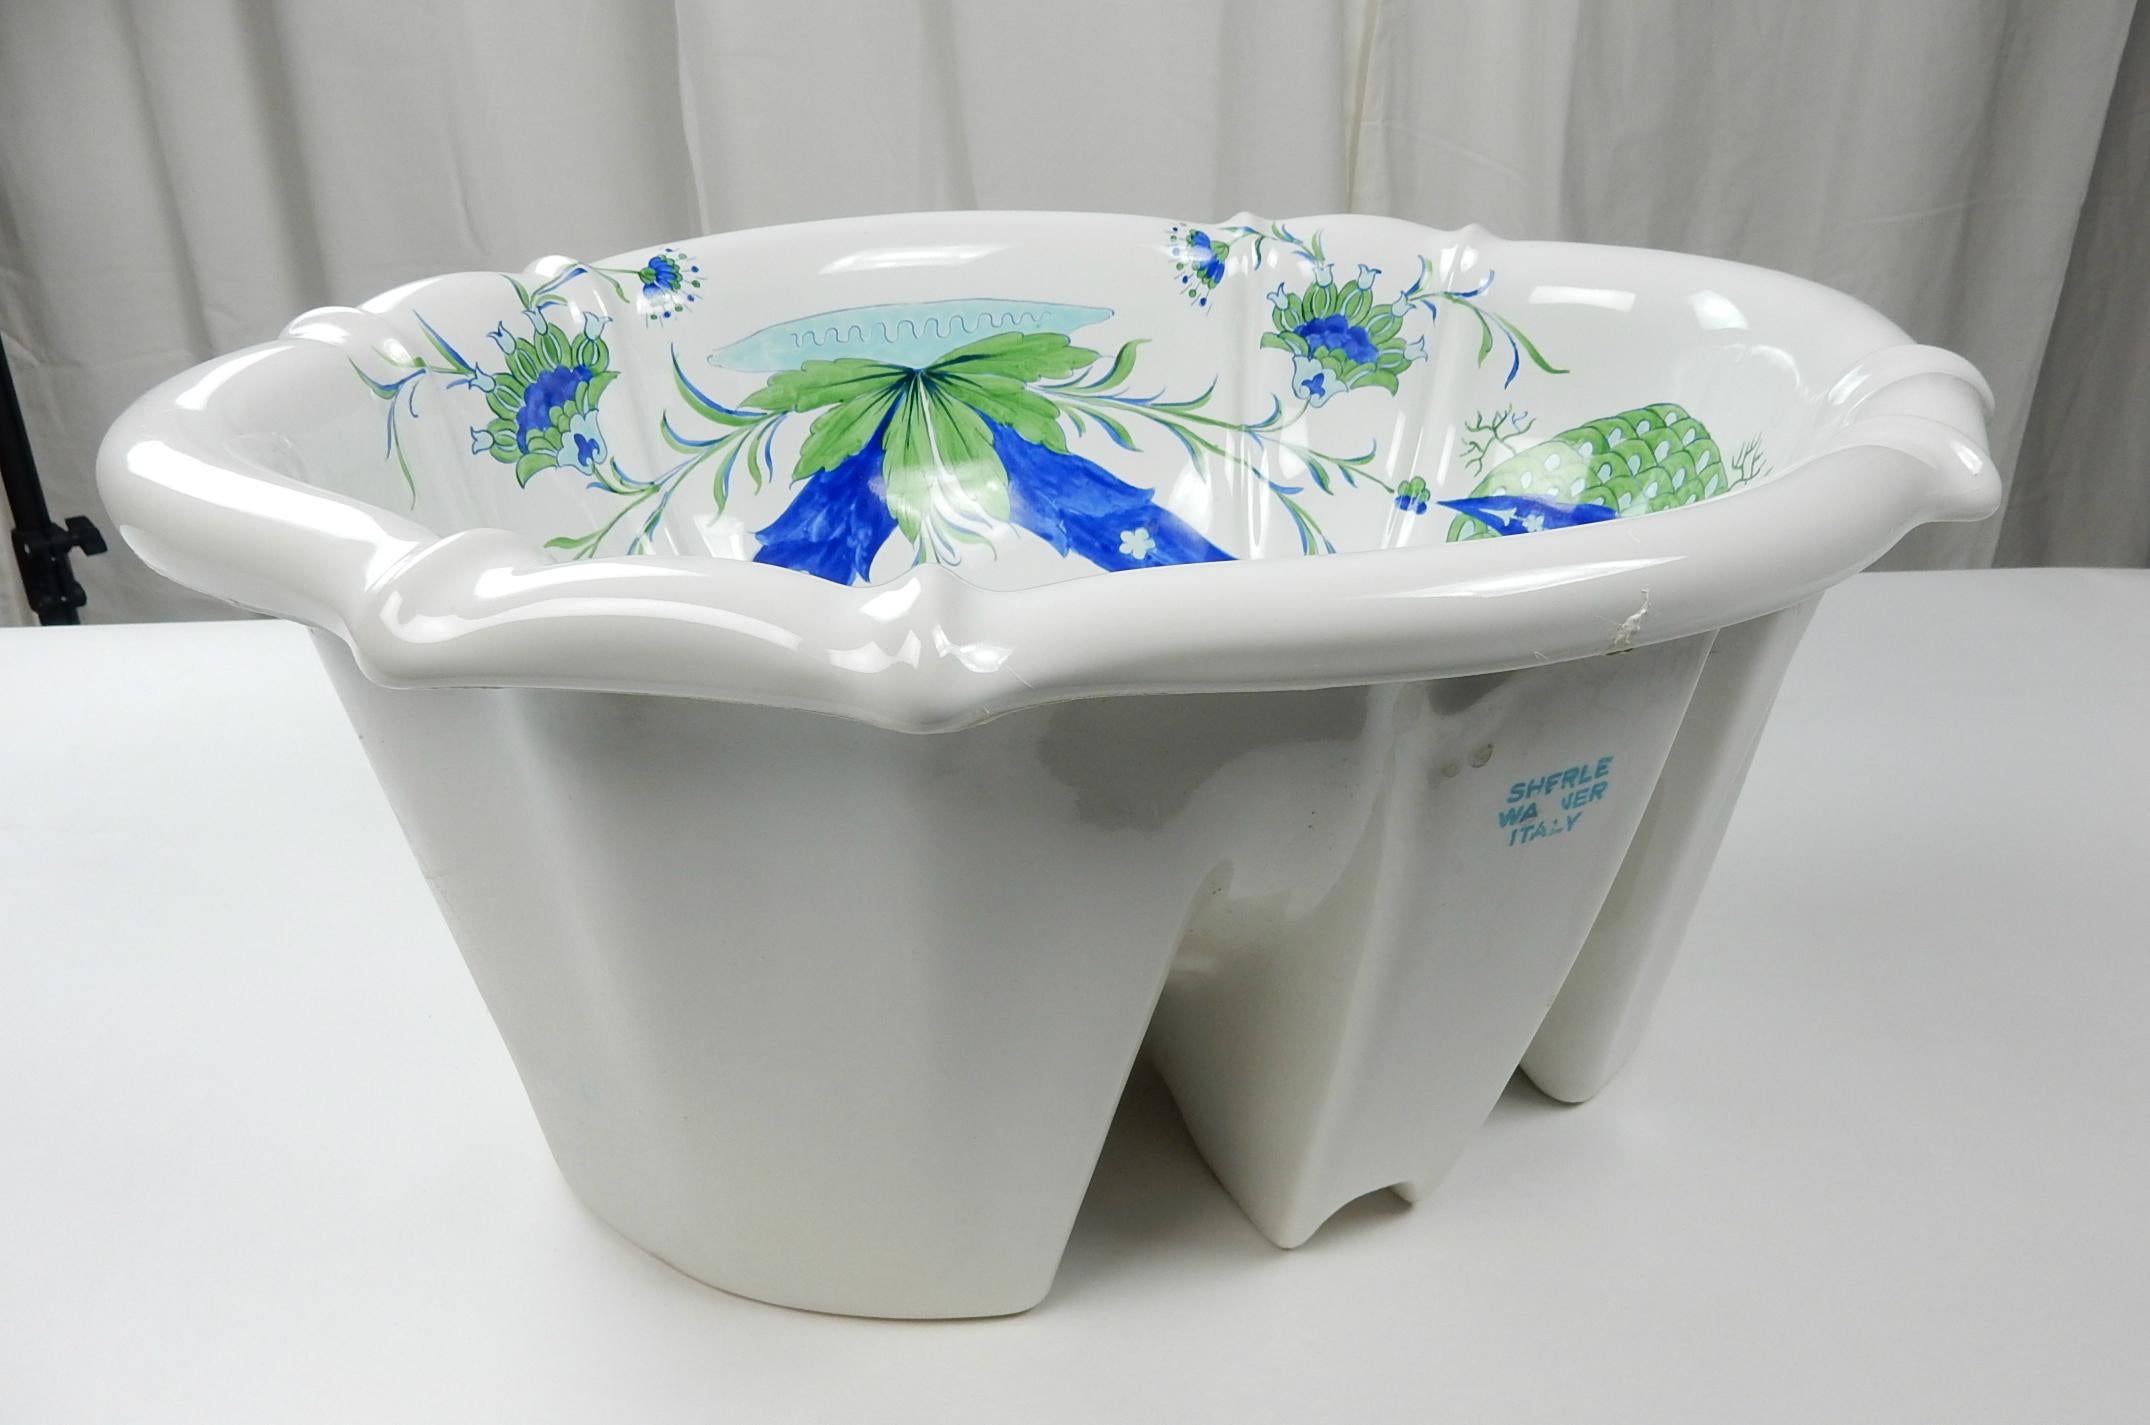 Gorgeous scalloped over edge basin/sink from the Sherle Wagner collection circa 1960s.
Porcelain hand painted design, glossy white.
 